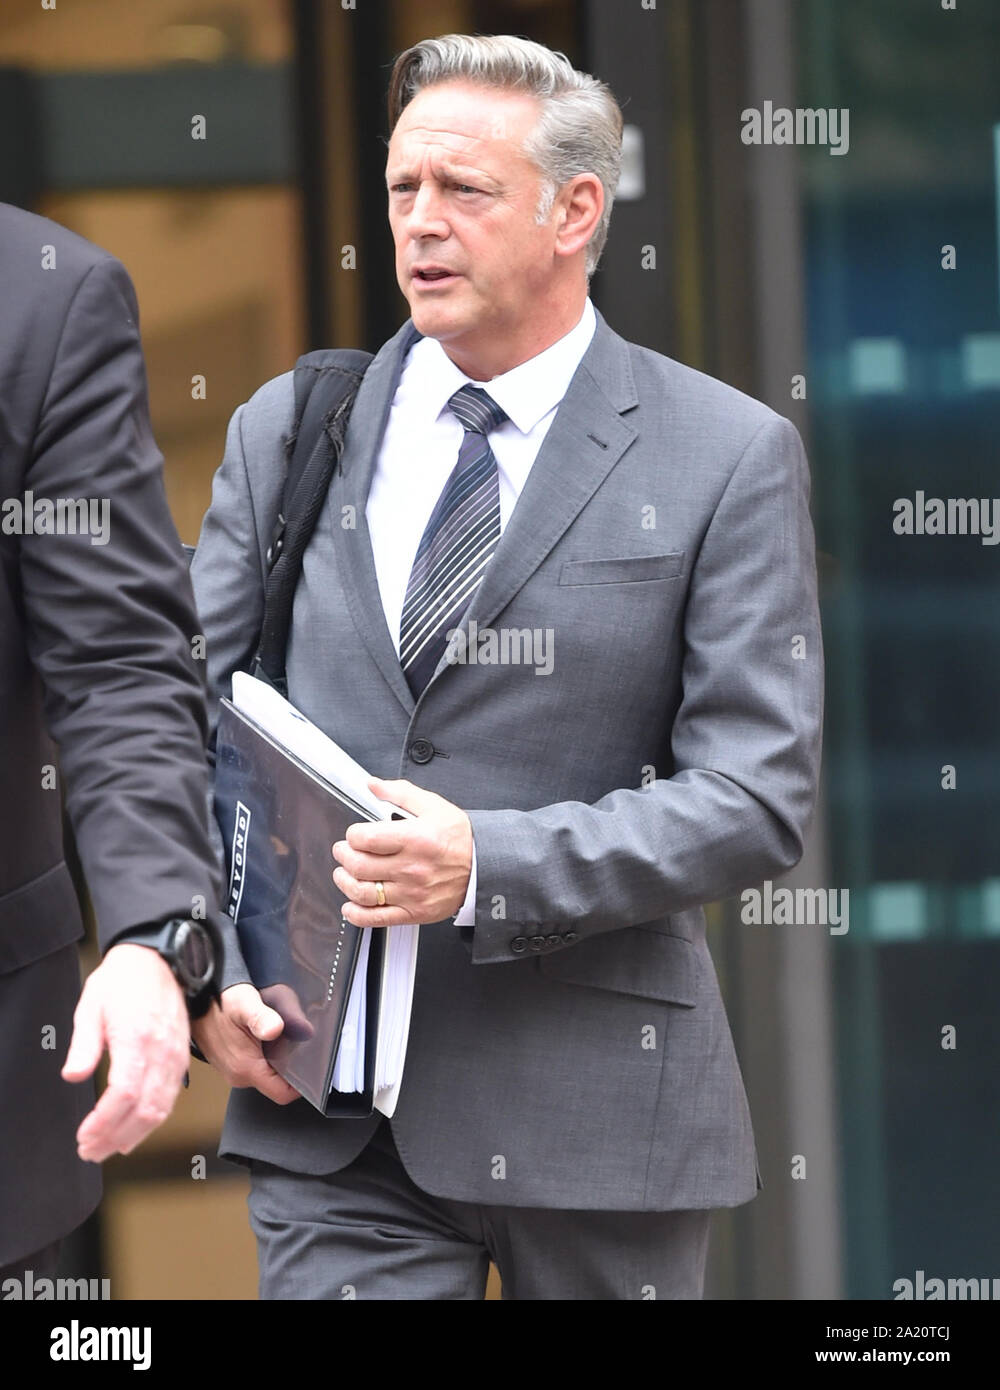 Mike Shearwood, the former chief executive of Clarks shoes, ahead of an  employment tribunal at Bristol Civil Justice Centre, where he is claiming  unfair dismissal Stock Photo - Alamy